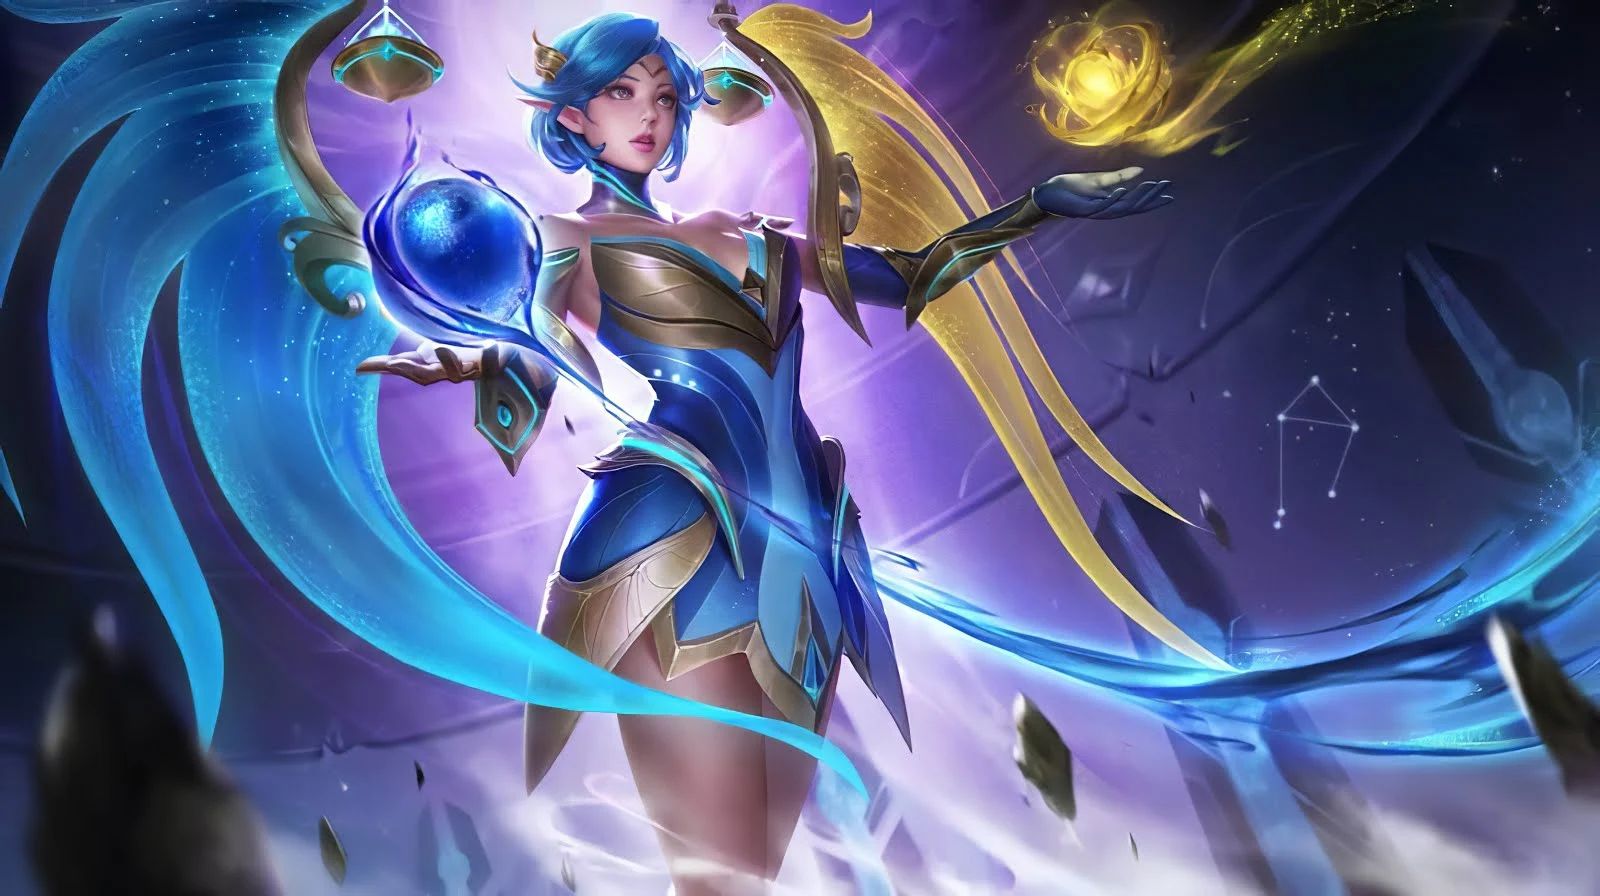 Photo#87 Mobile Legends Wallpapers HD: ALL ZODIAC SKINS WALLPAPERS HD